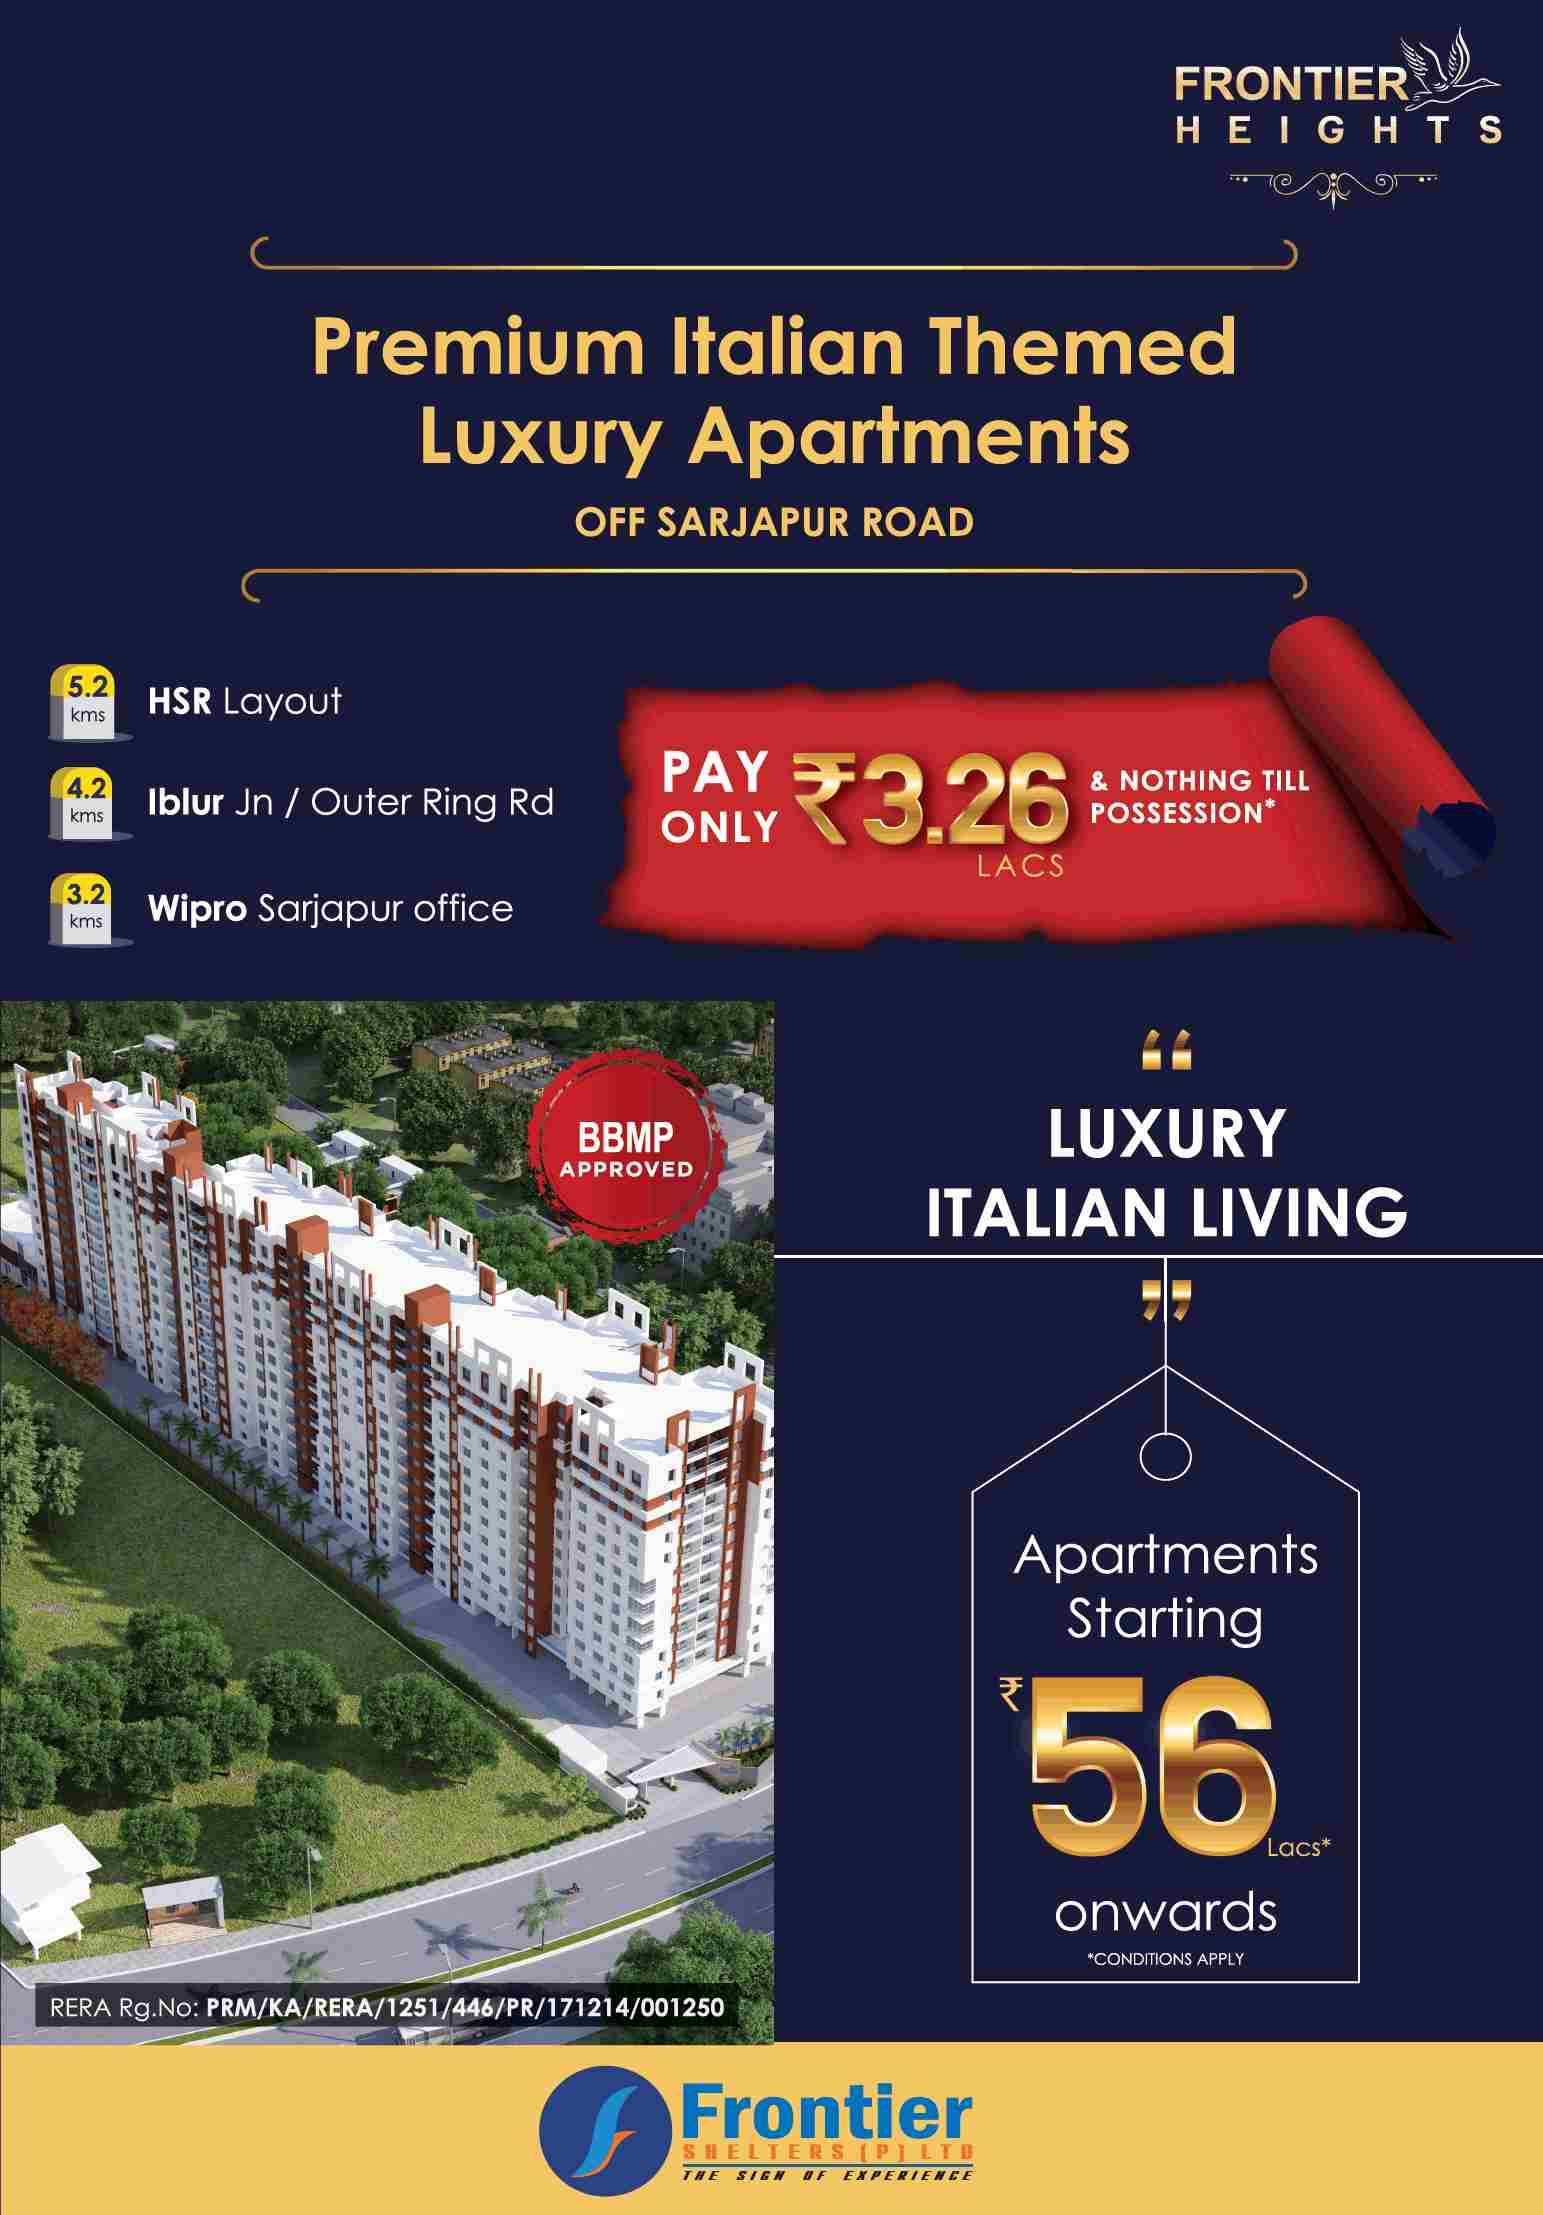 Pay Rs 3.26 Lacs & nothing till possession at Frontier Heights in Bangalore Update